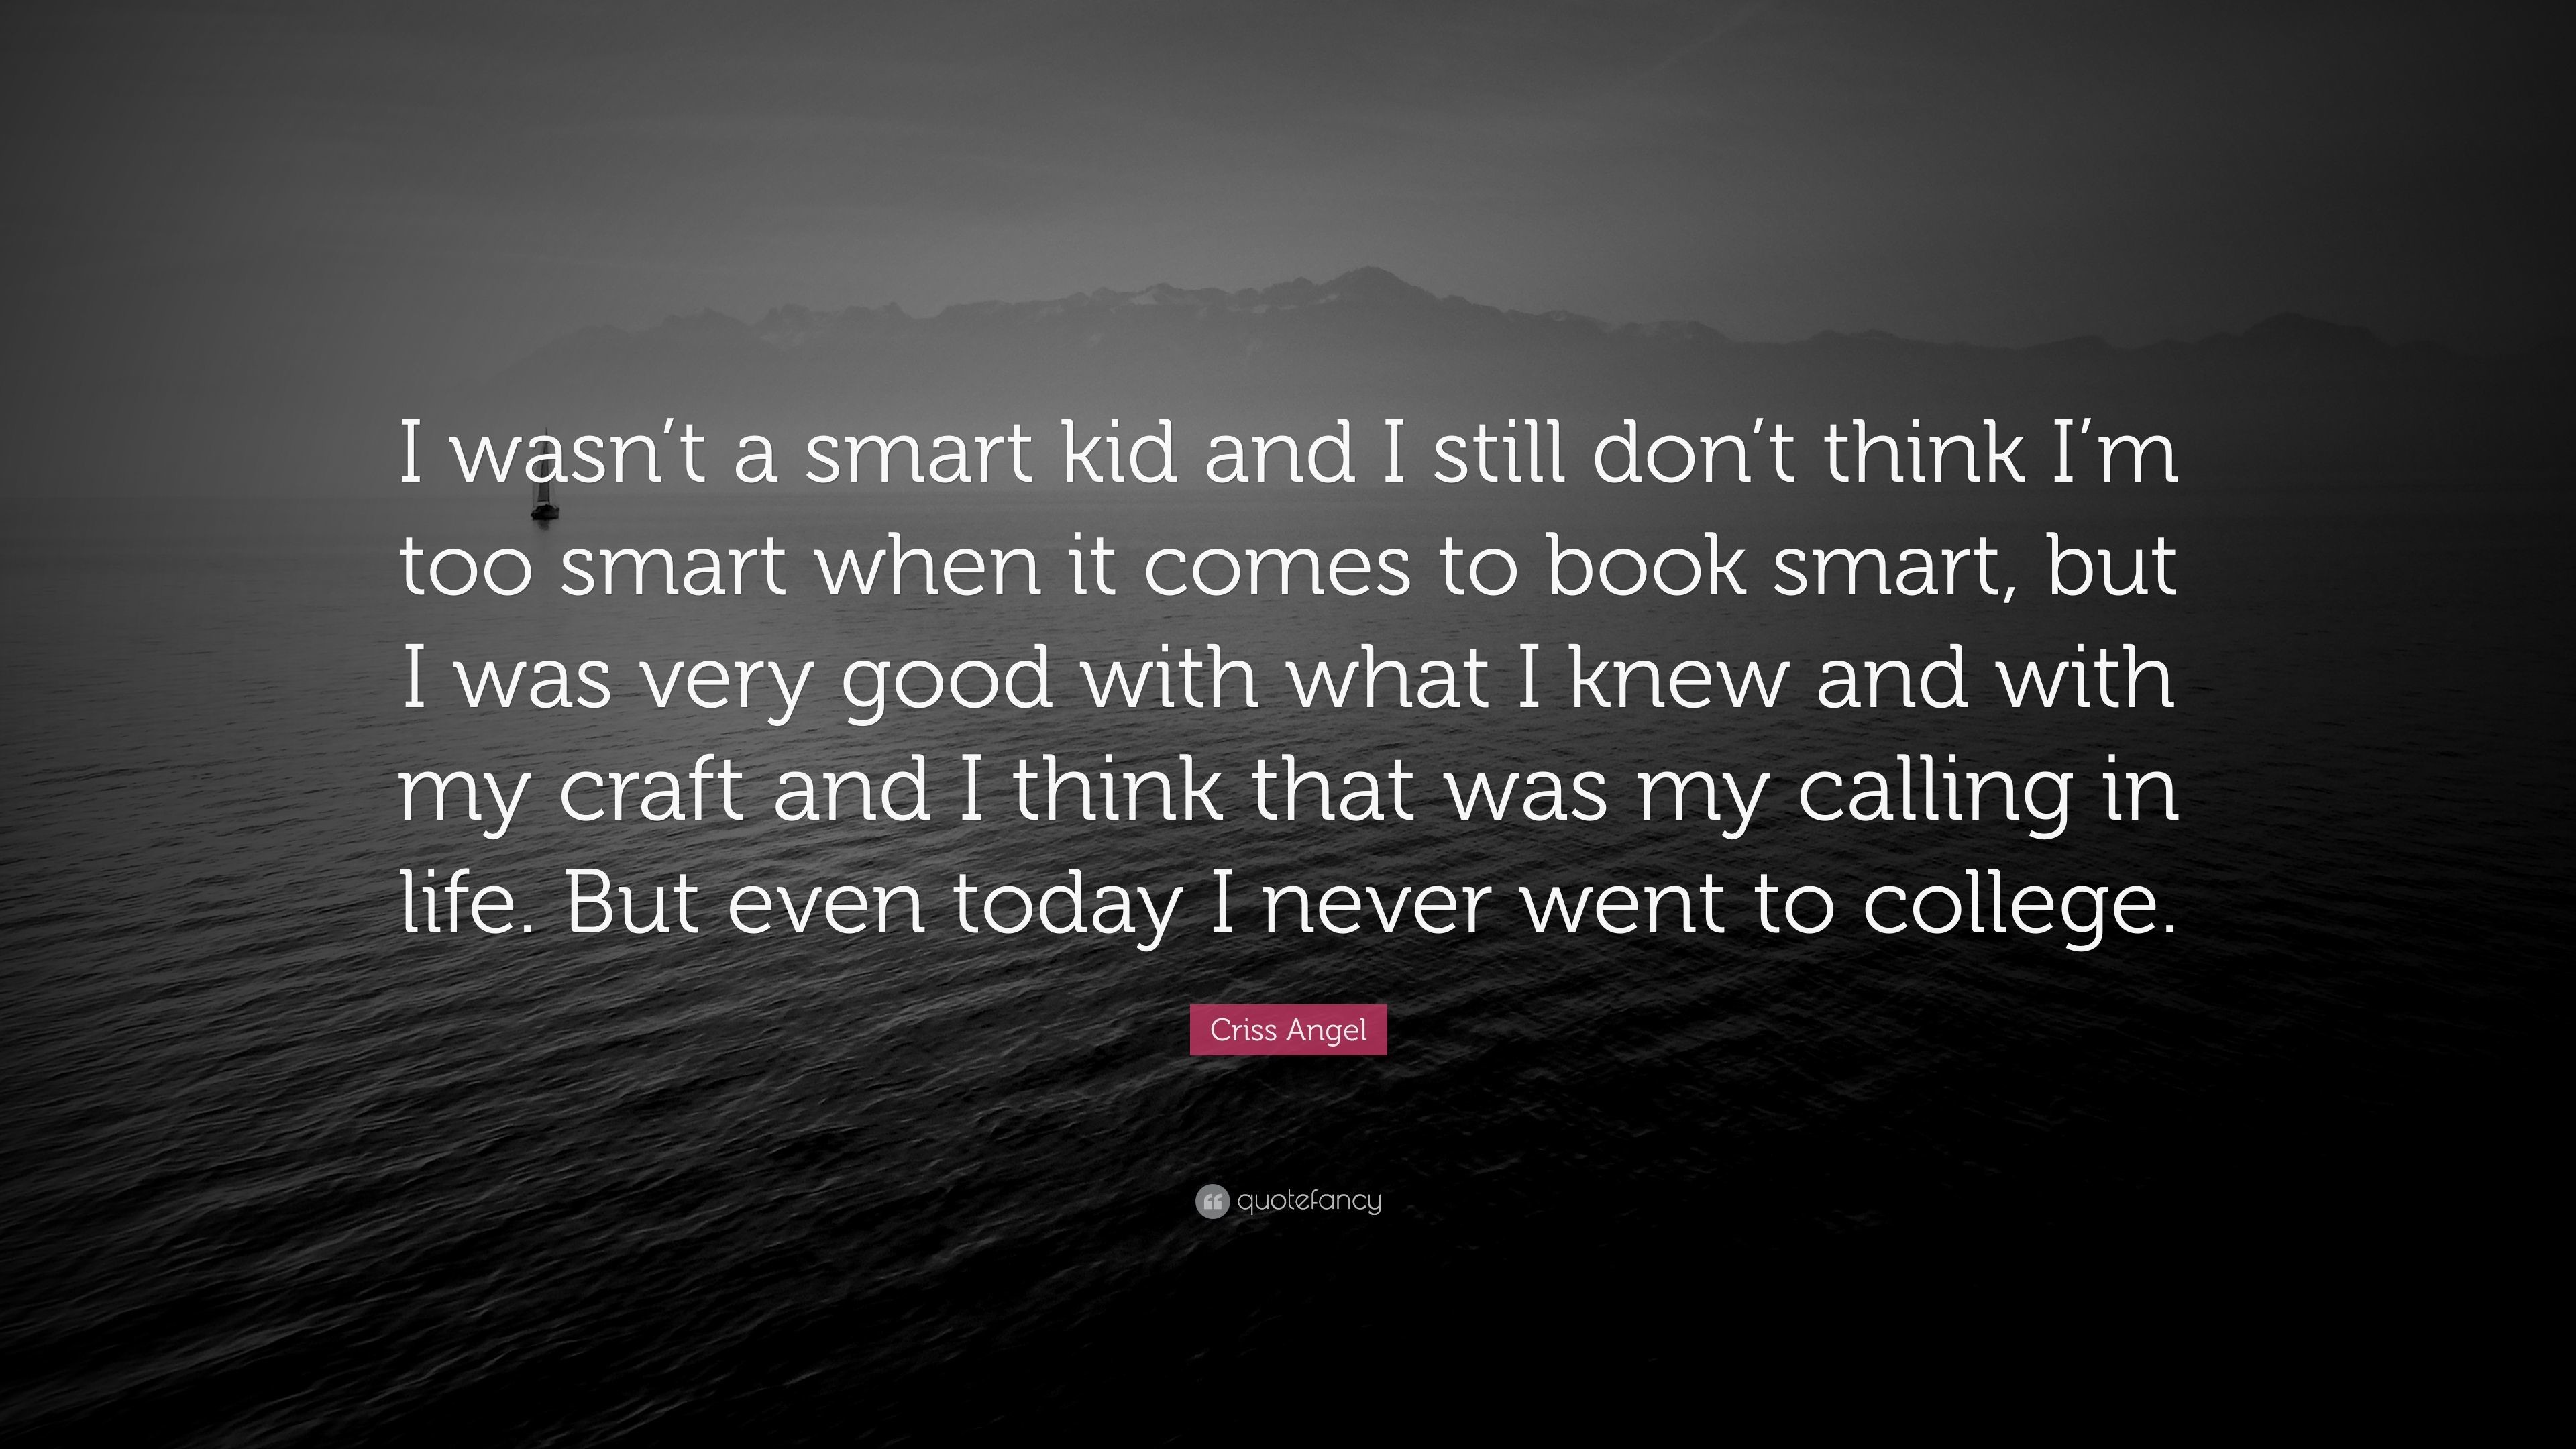 3840x2160 Criss Angel Quote: “I wasn't a smart kid and I still don